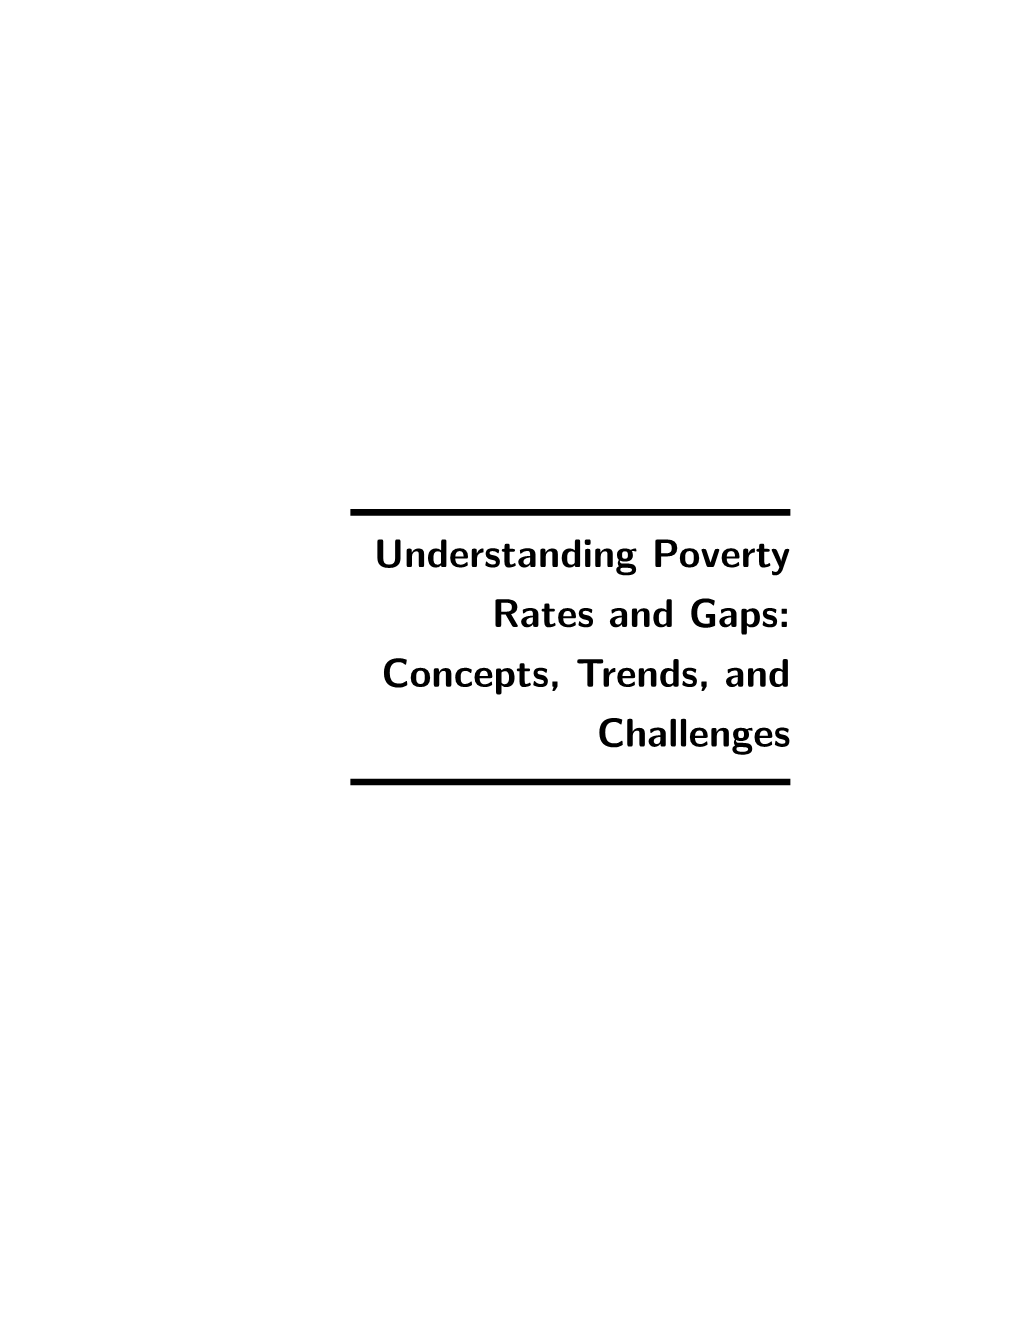 Understanding Poverty Rates and Gaps: Concepts, Trends, and Challenges